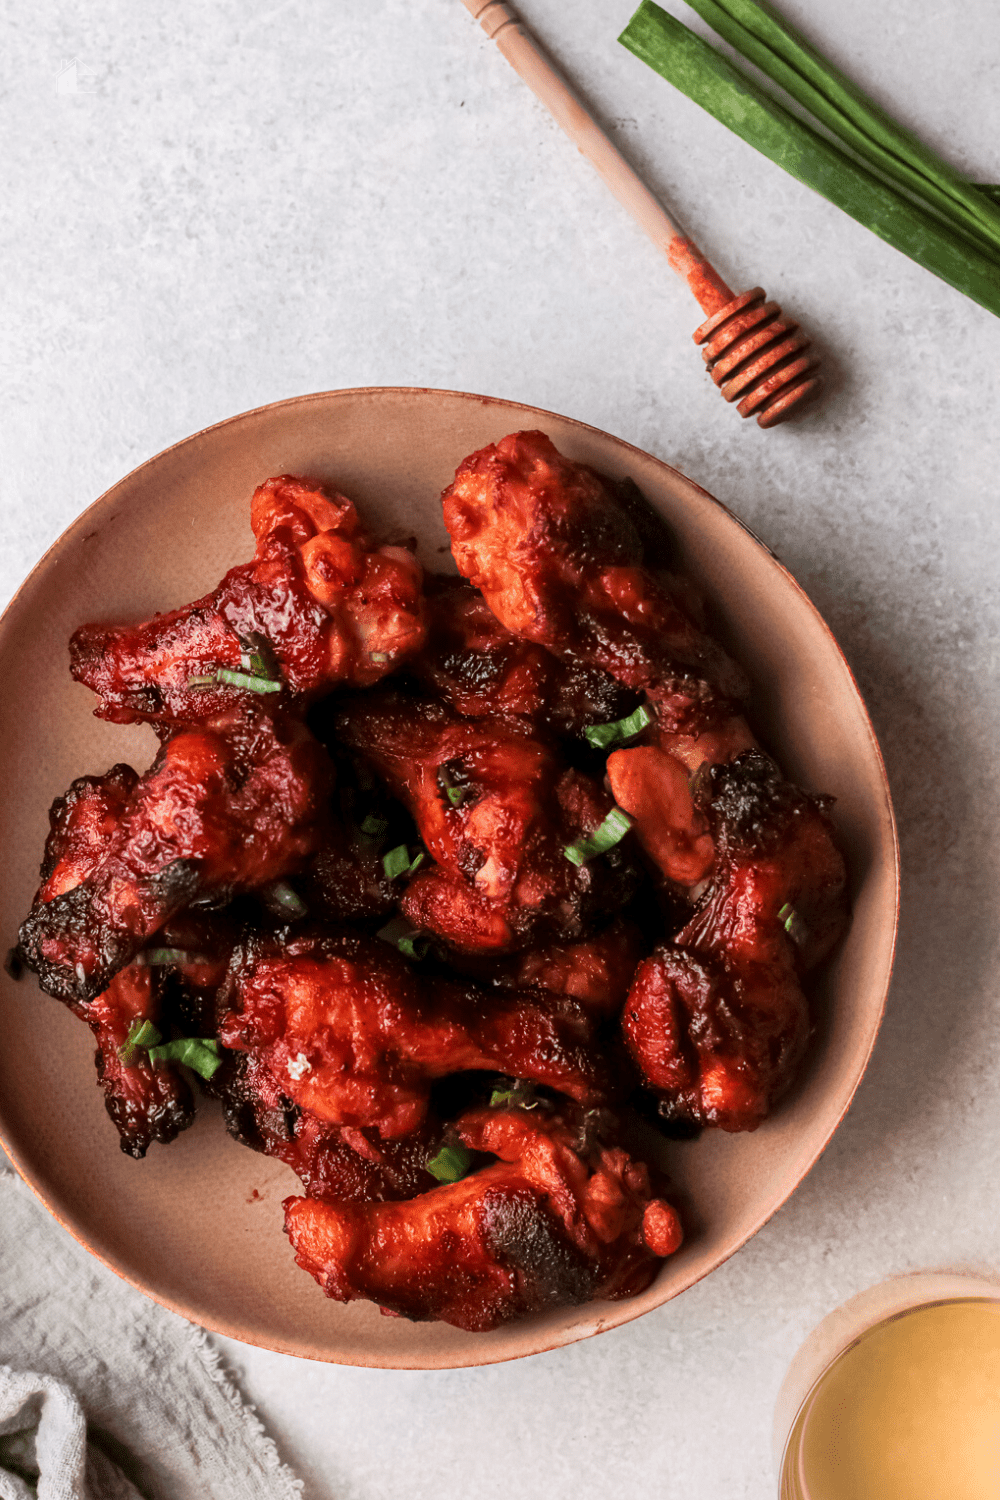 Who doesn't love chicken wings? These Bourbon Honey Air Fryer Chicken Wings are loaded with great flavor that will make your taste buds jump for joy! via @mystayathome